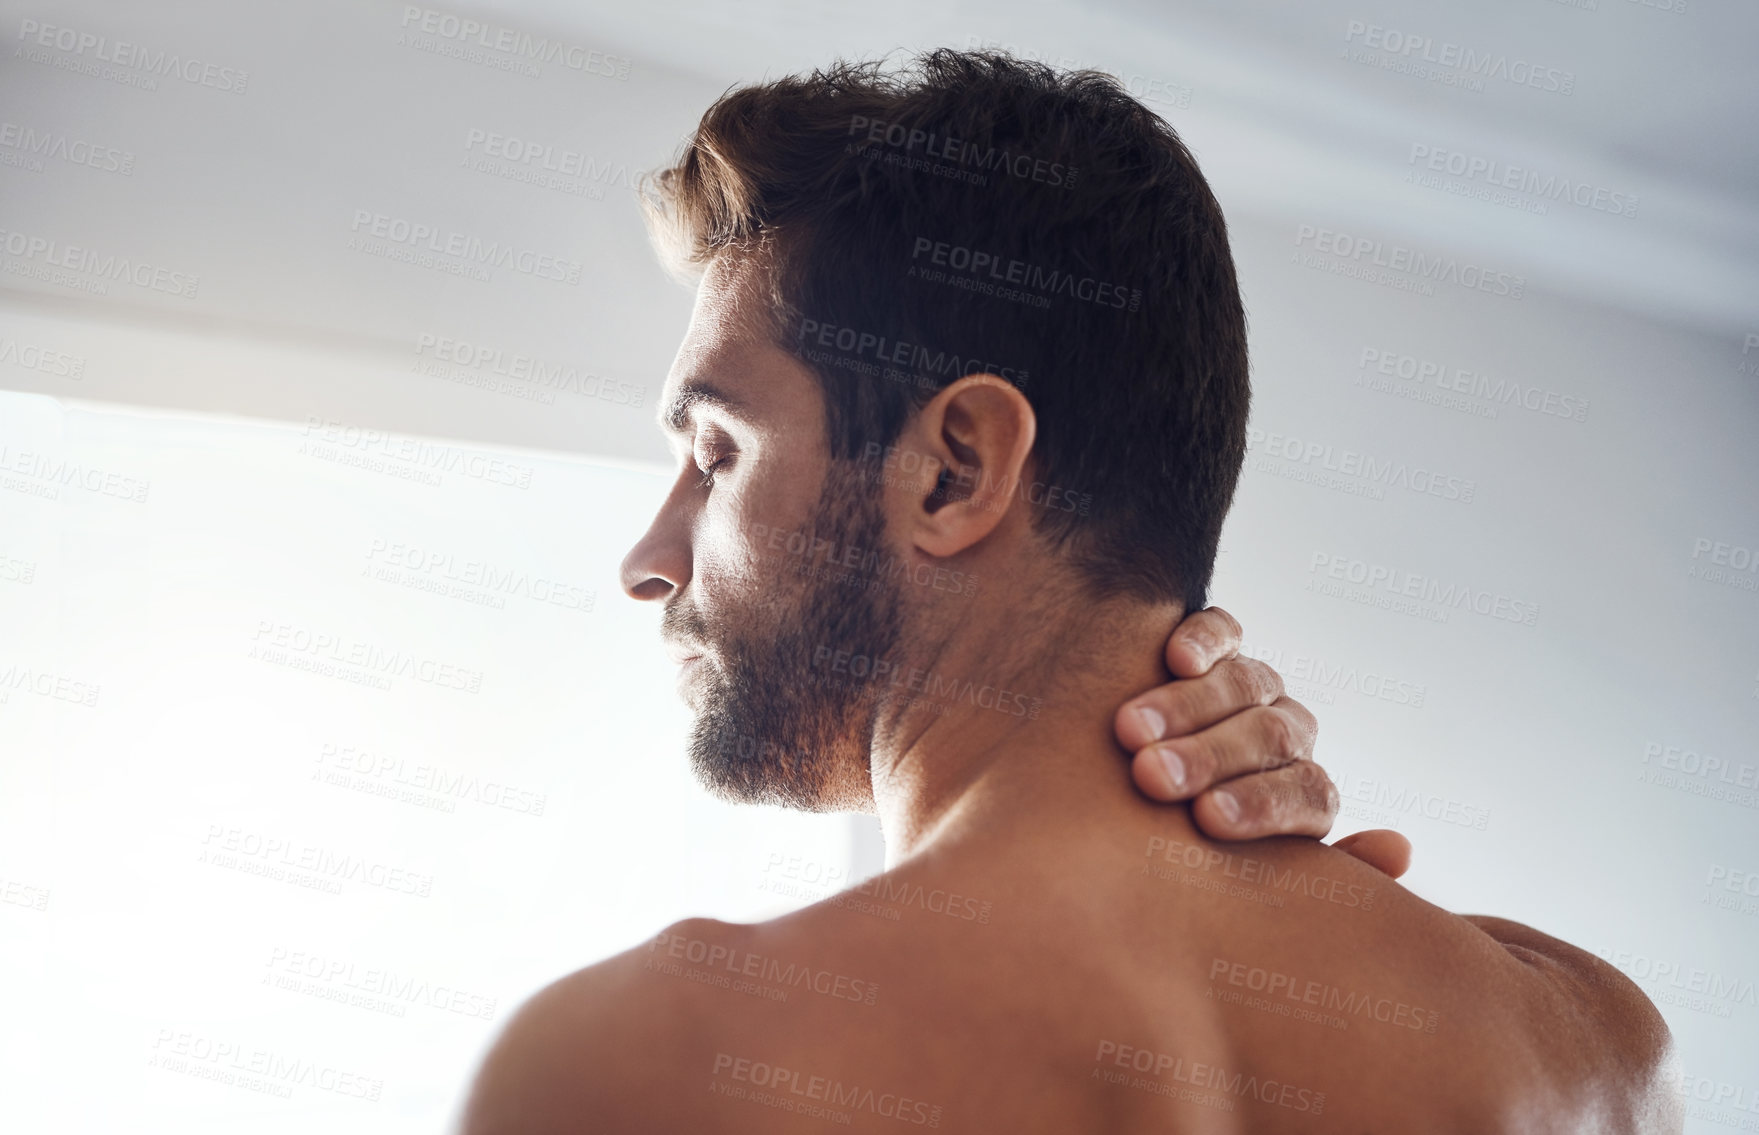 Buy stock photo Rearview shot of a handsome young man holding his neck in pain while relaxing at home